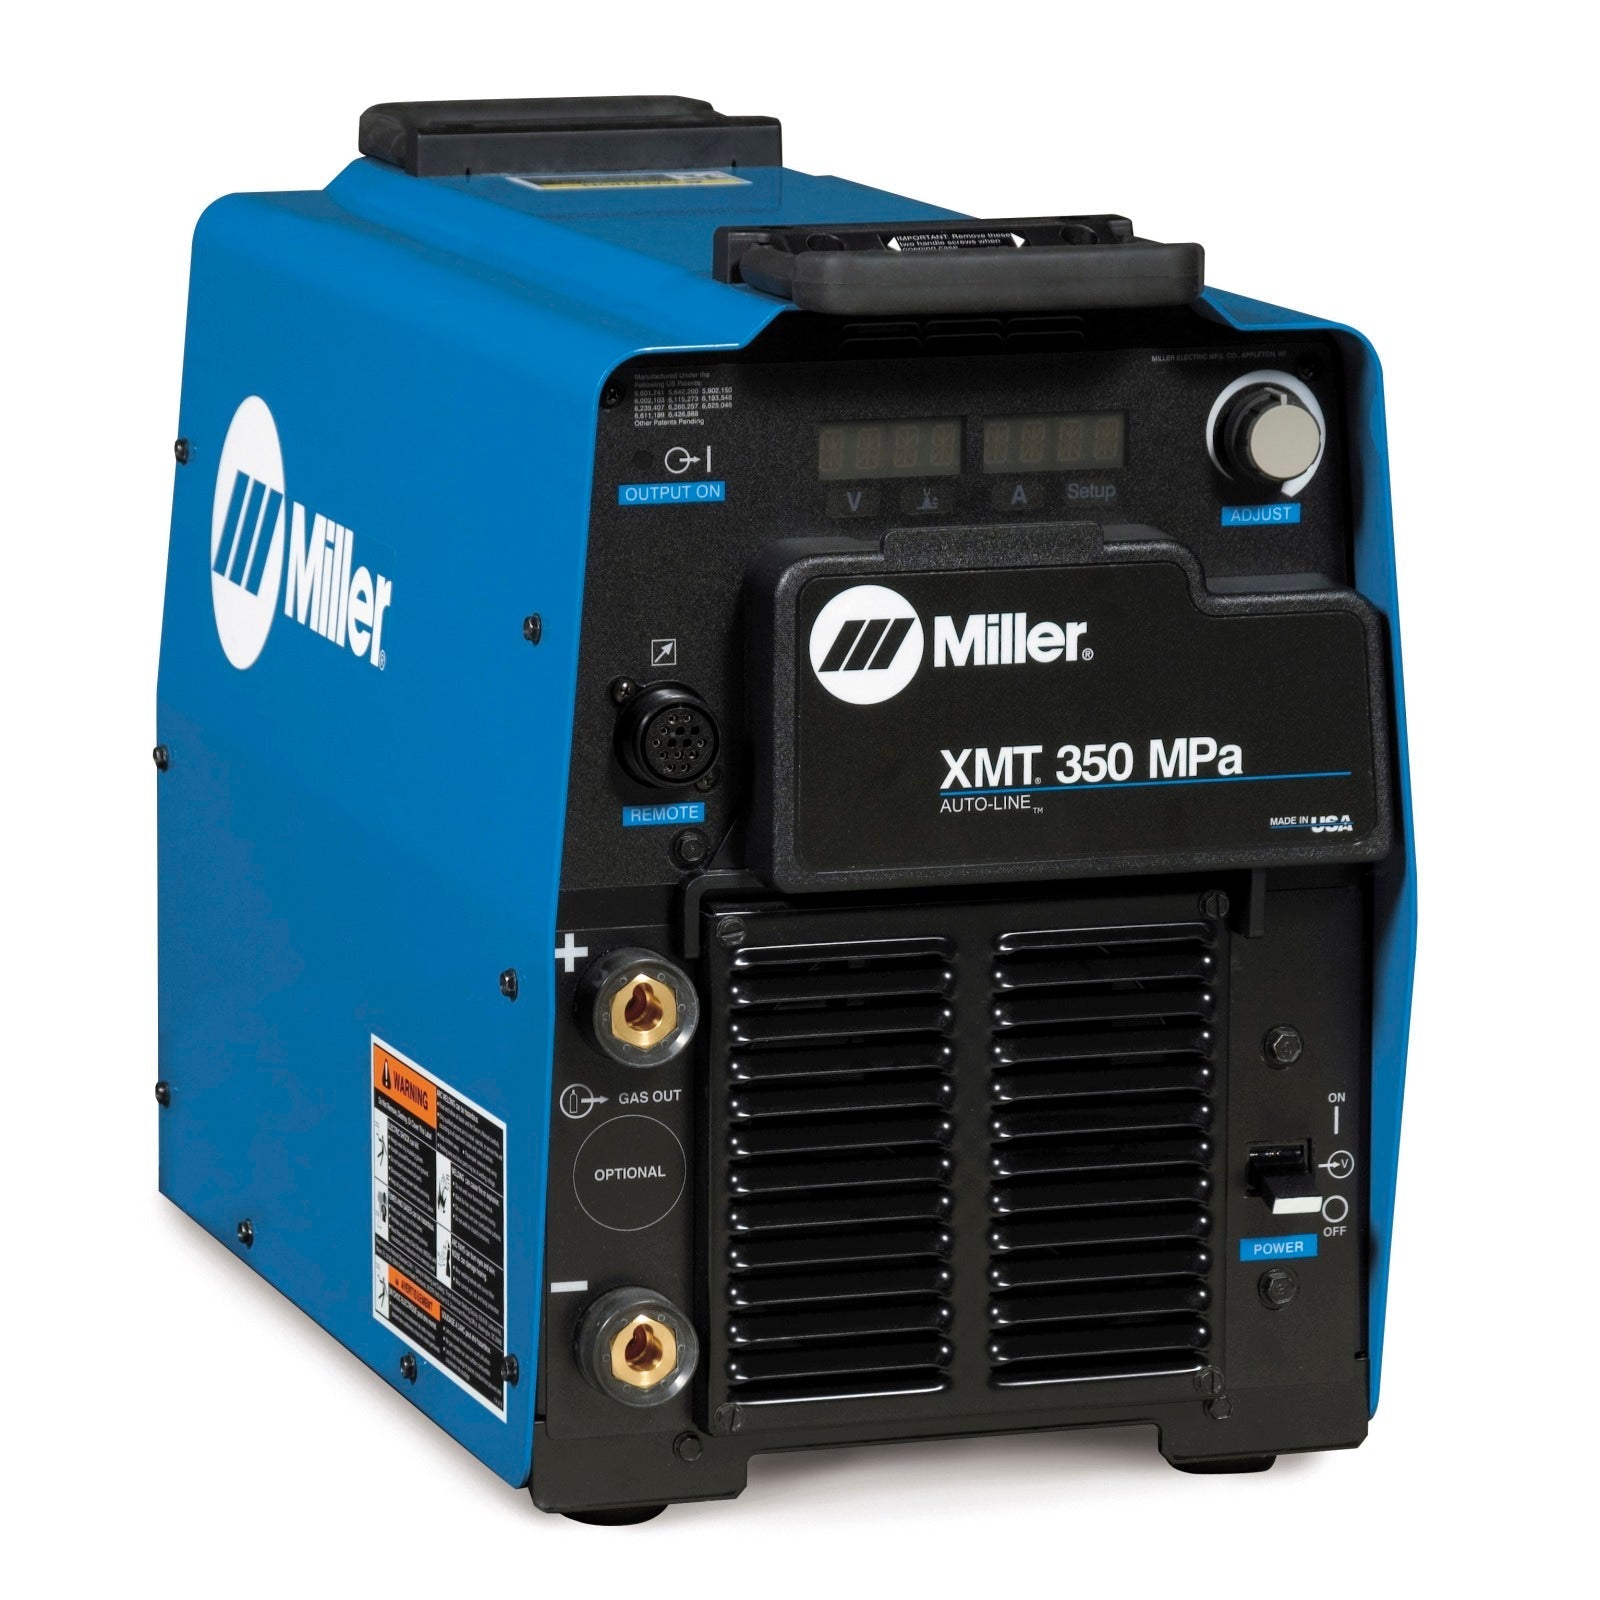 Miller XMT 350 MPa Multiprocess Welder, Tweco Connections - 907366014